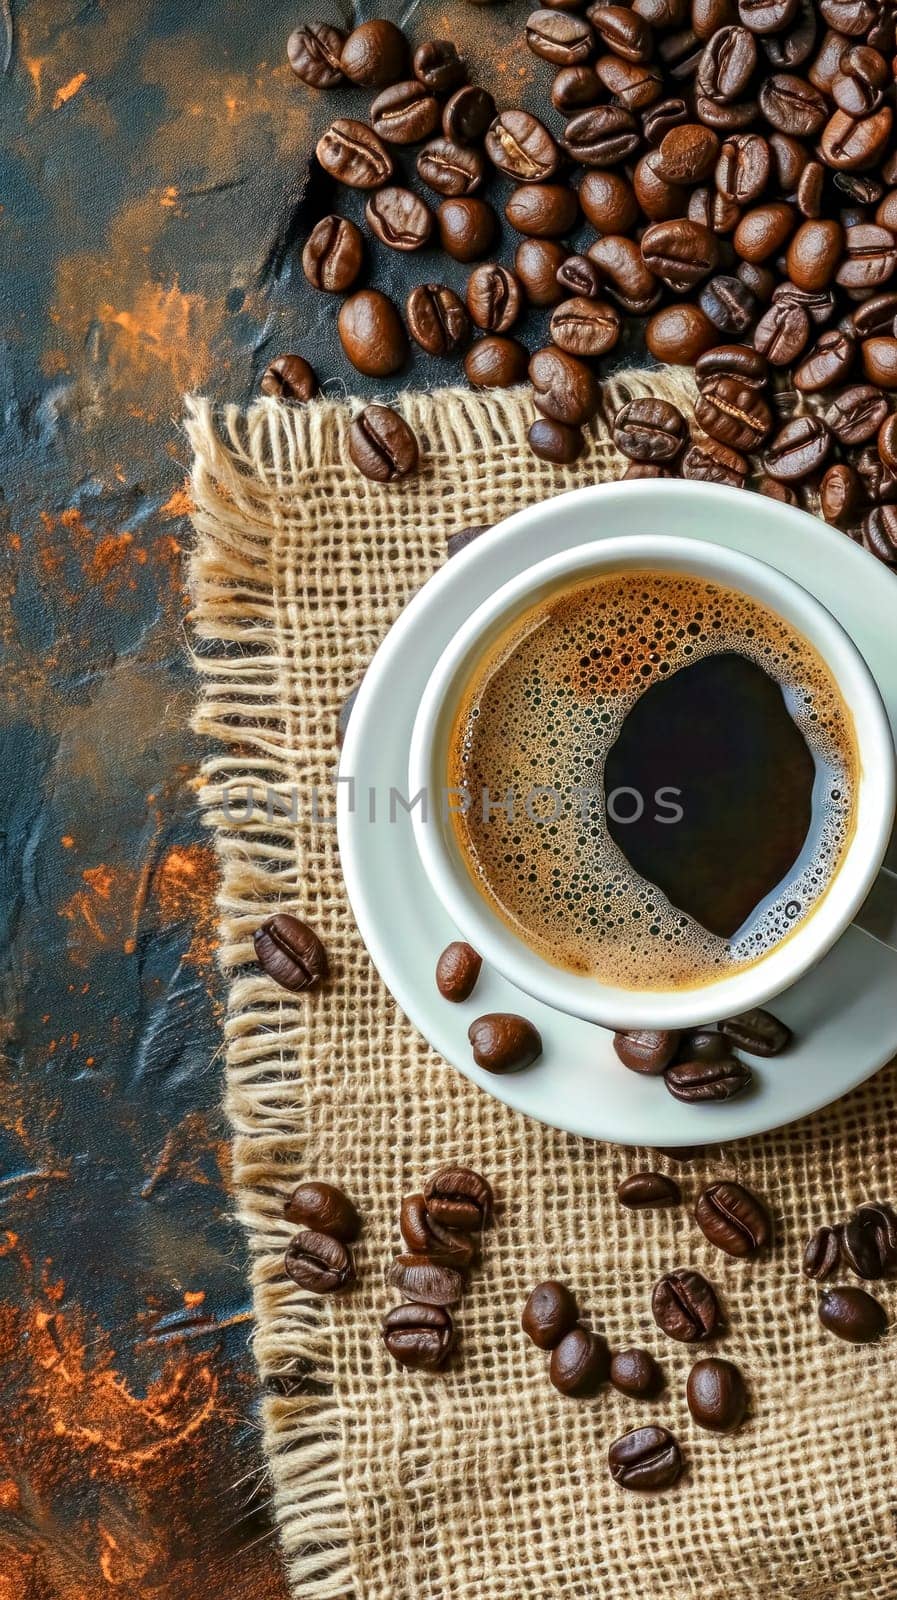 cup of freshly brewed coffee atop a saucer, surrounded by scattered coffee beans on a burlap cloth against a rustic, textured background with tones of blue and brown, evoking a cozy, vertical